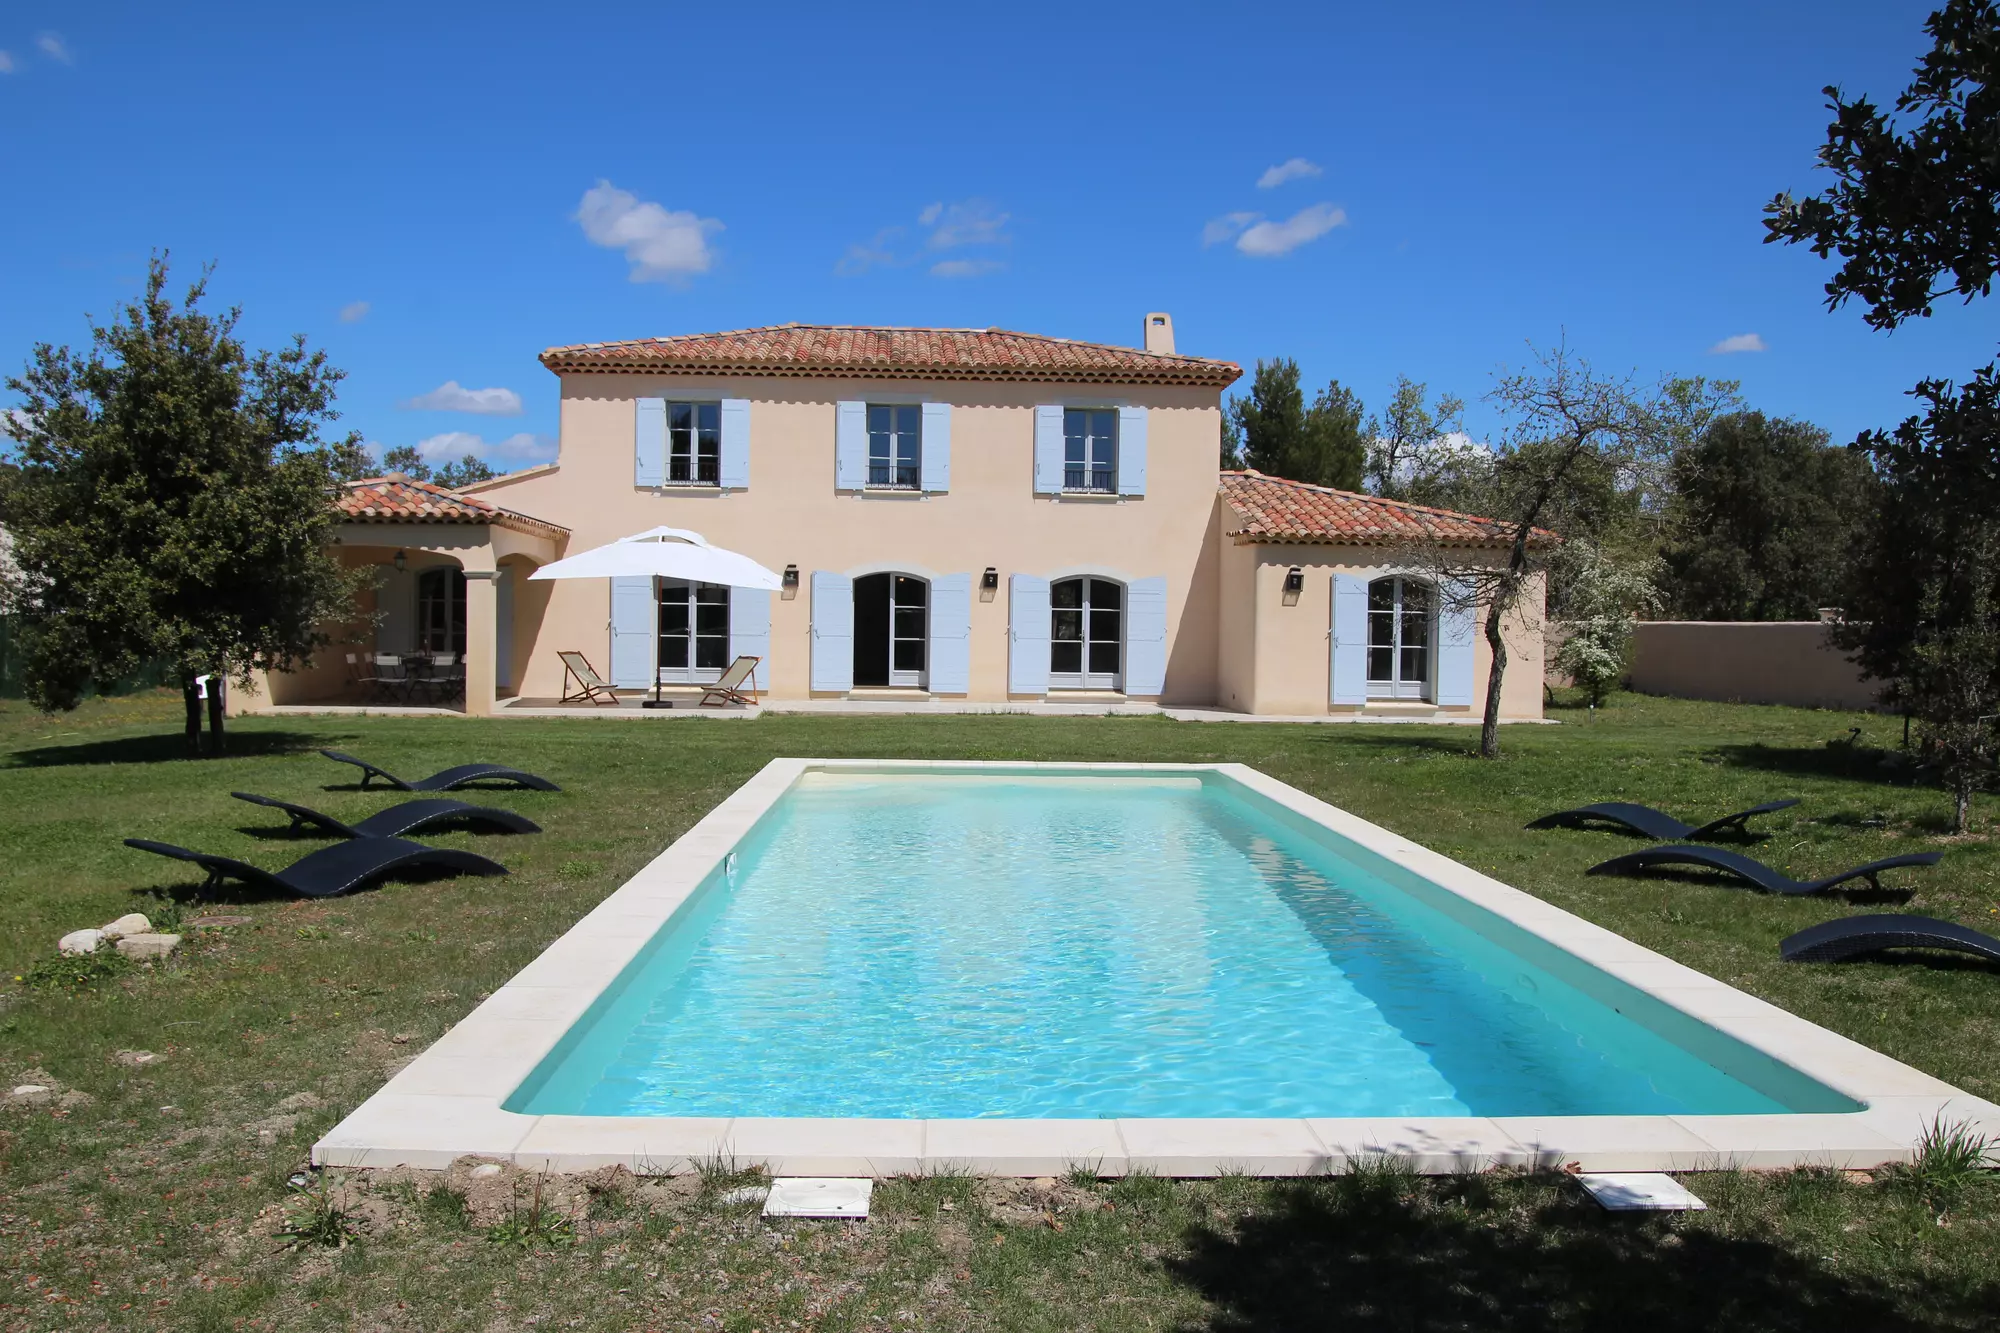 Beautiful villa for a family holiday in Provence!